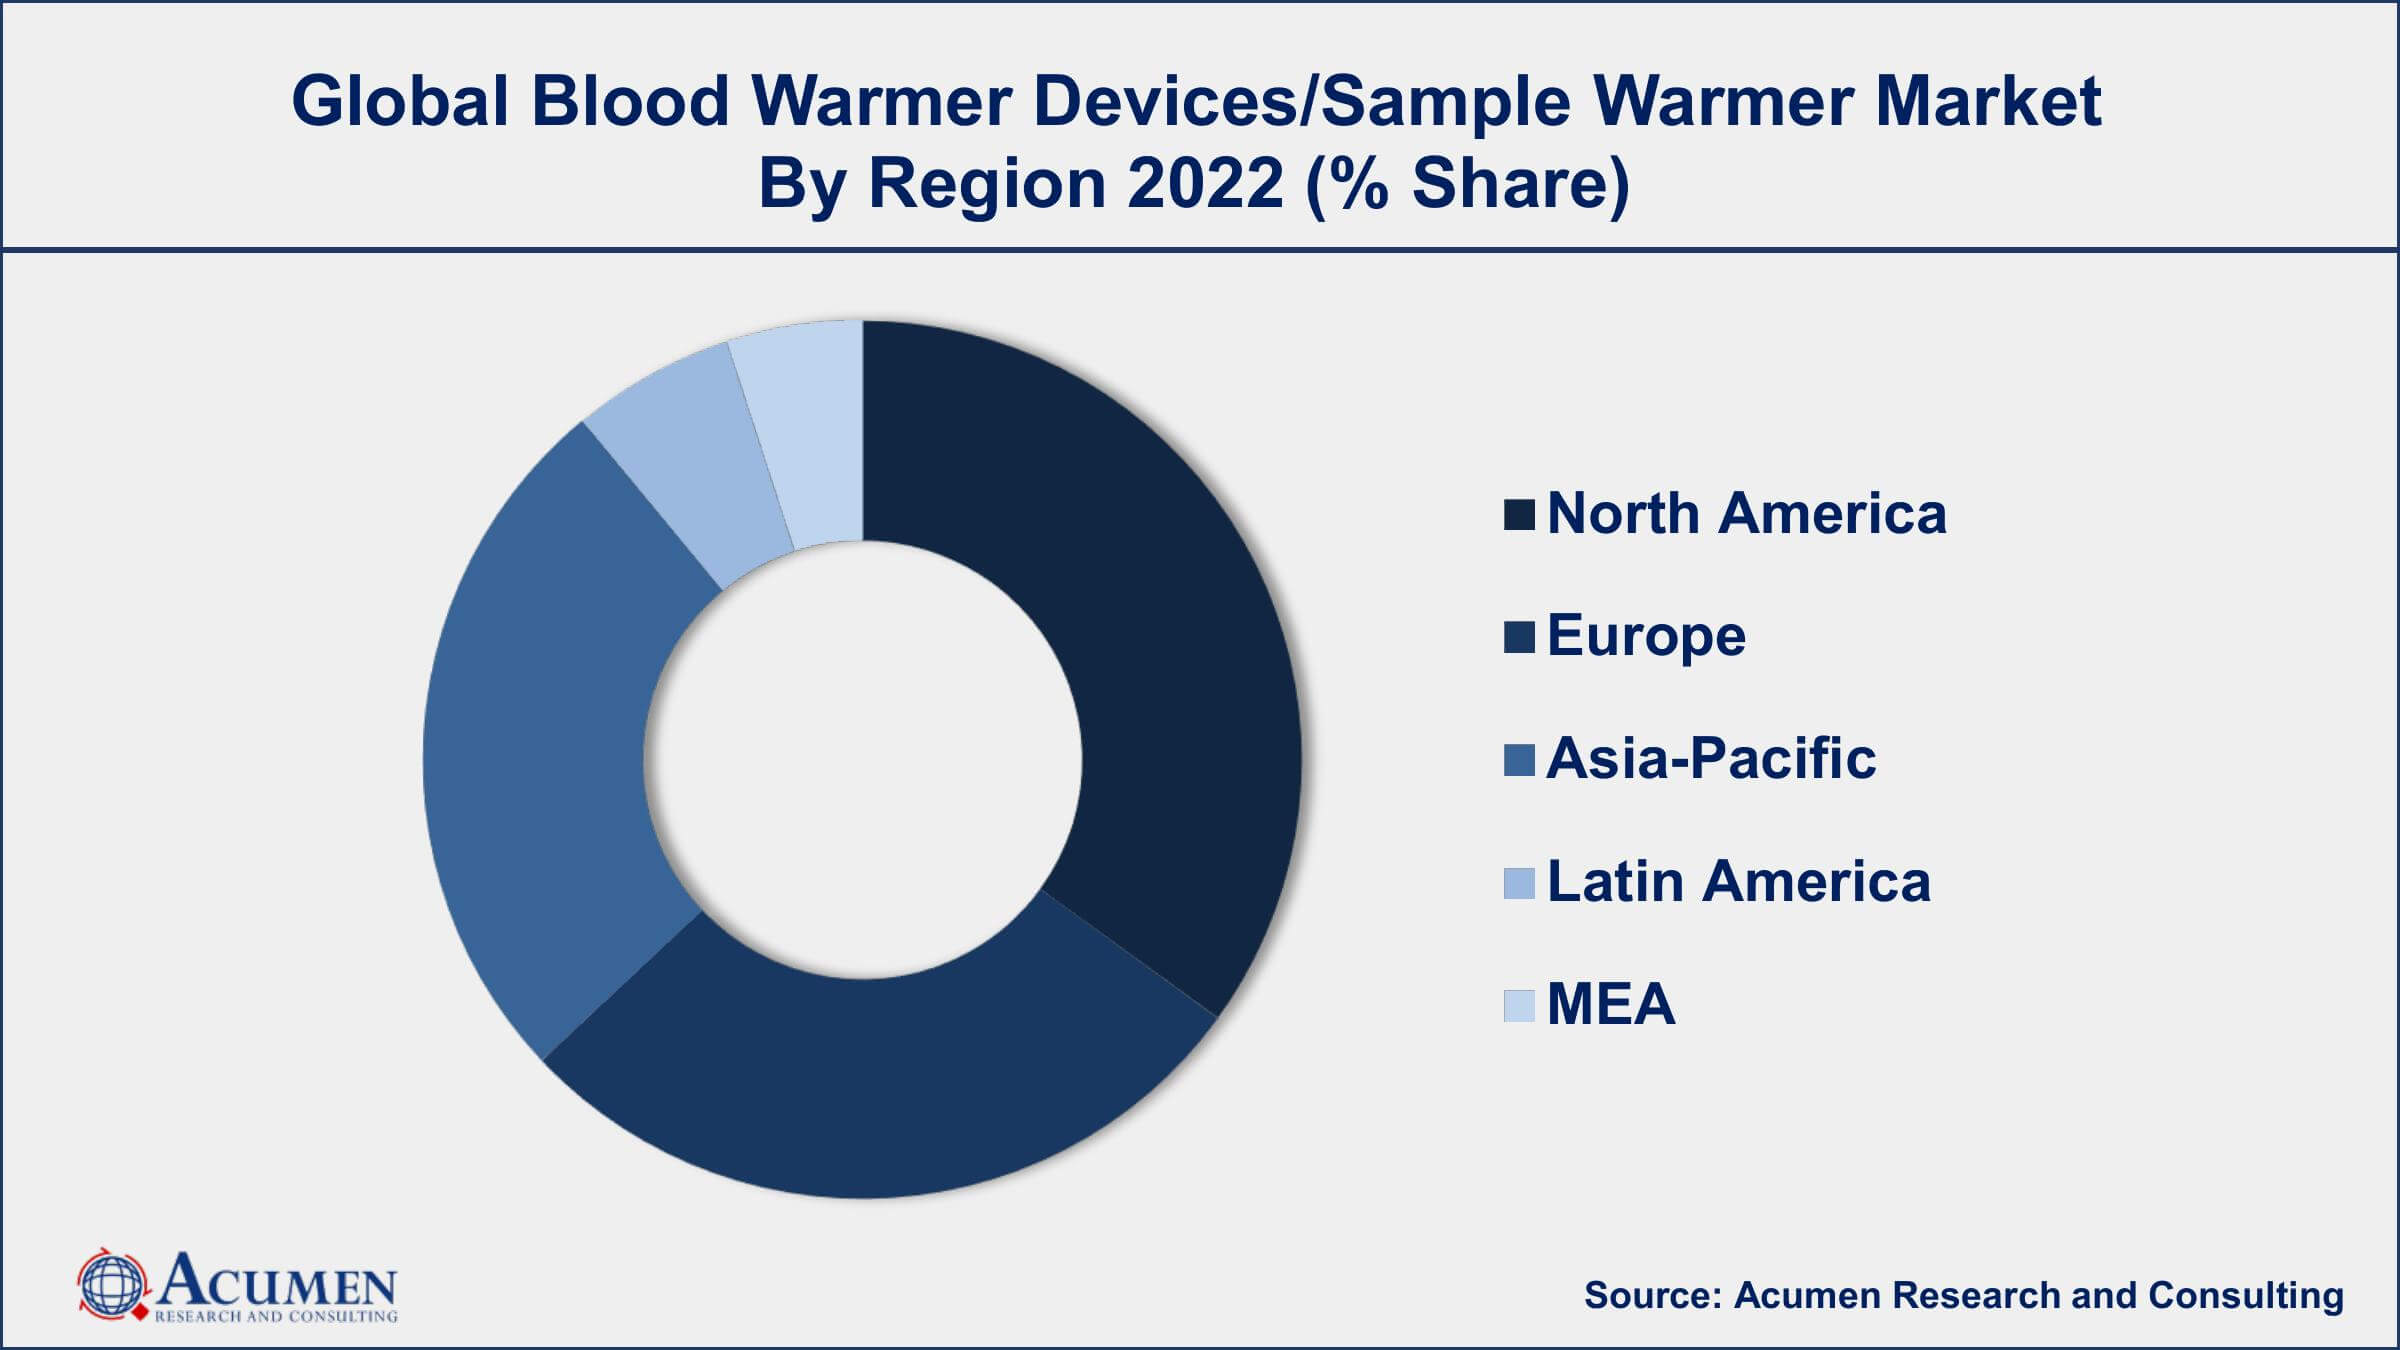 Blood Warmer Devices/Sample Warmer Market Drivers